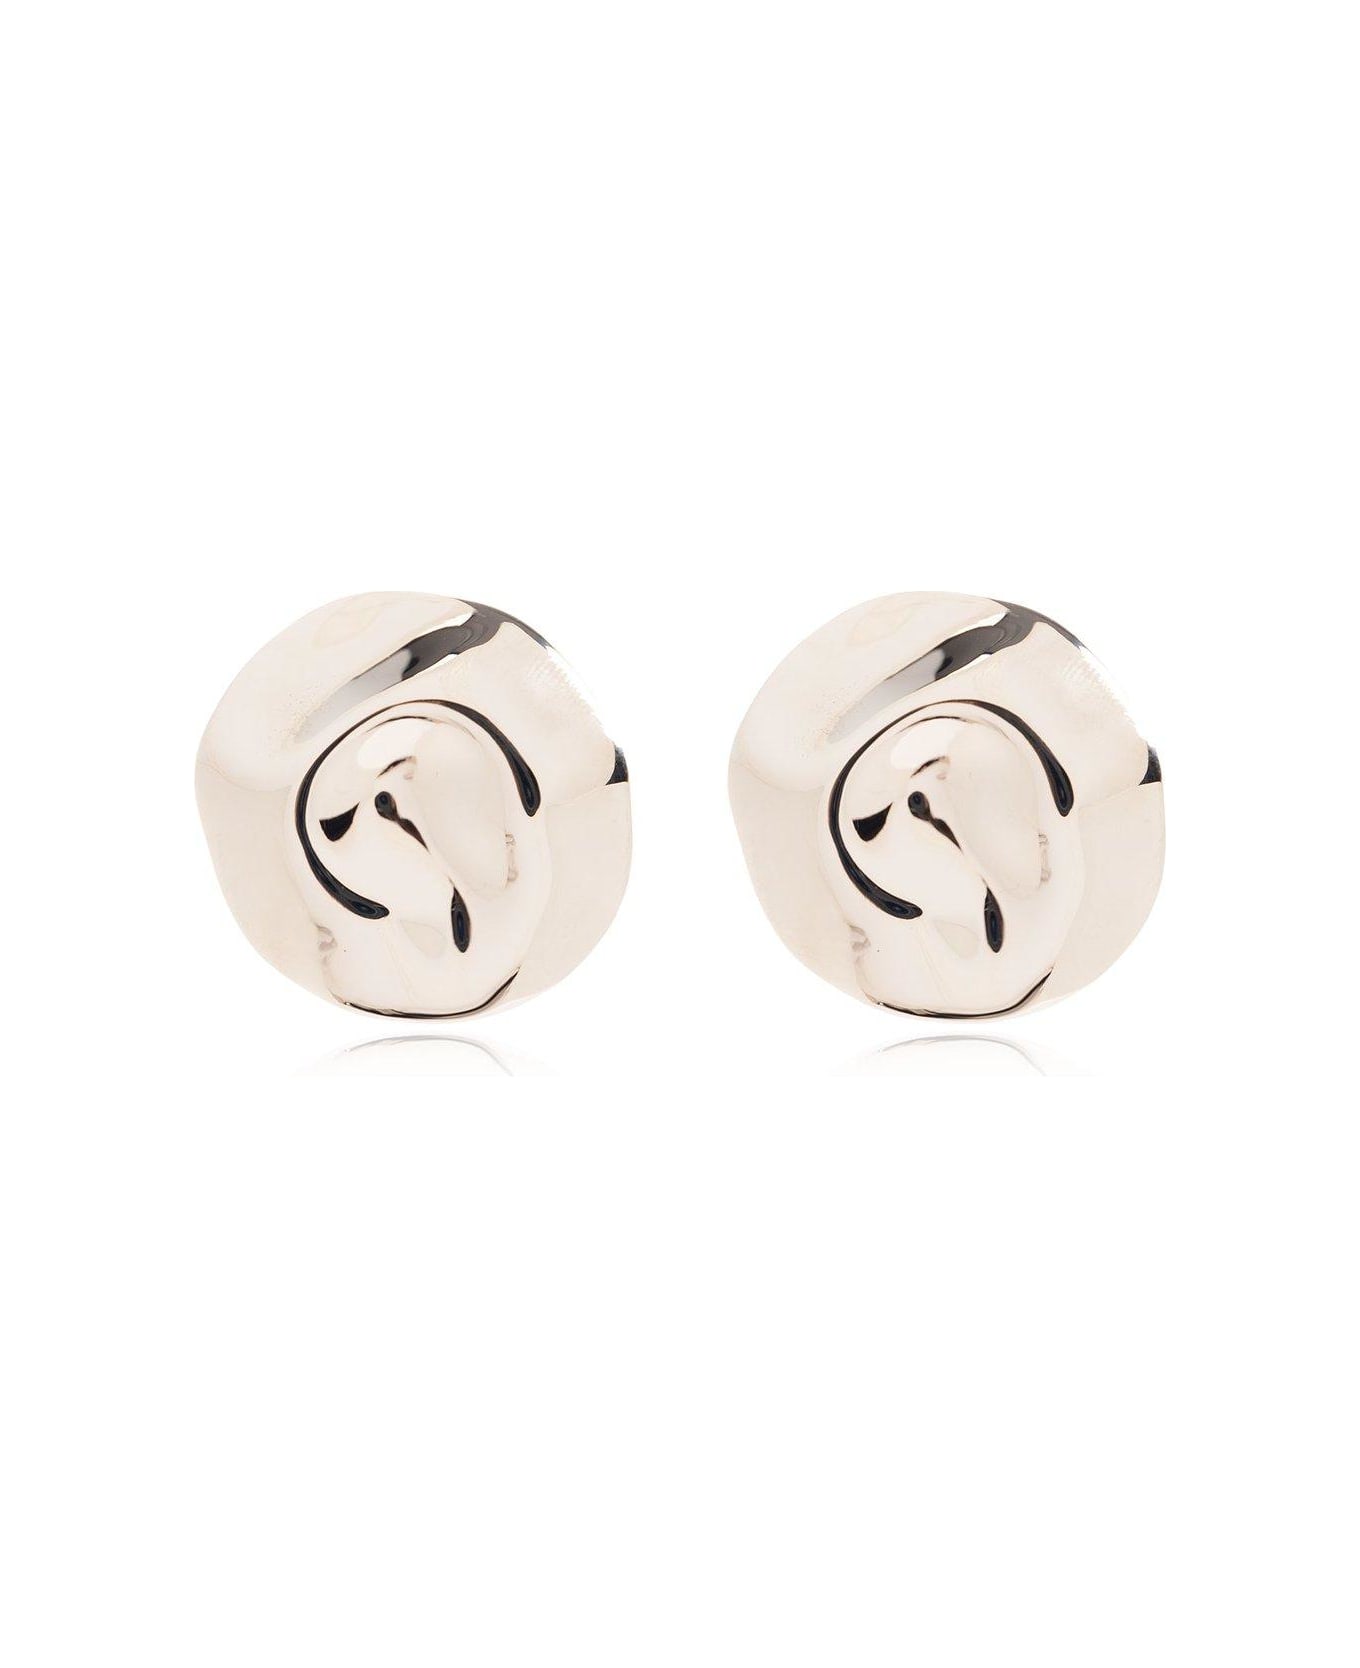 Alexander McQueen Beam Stud Polished Finish Earrings - SILVER イヤリング